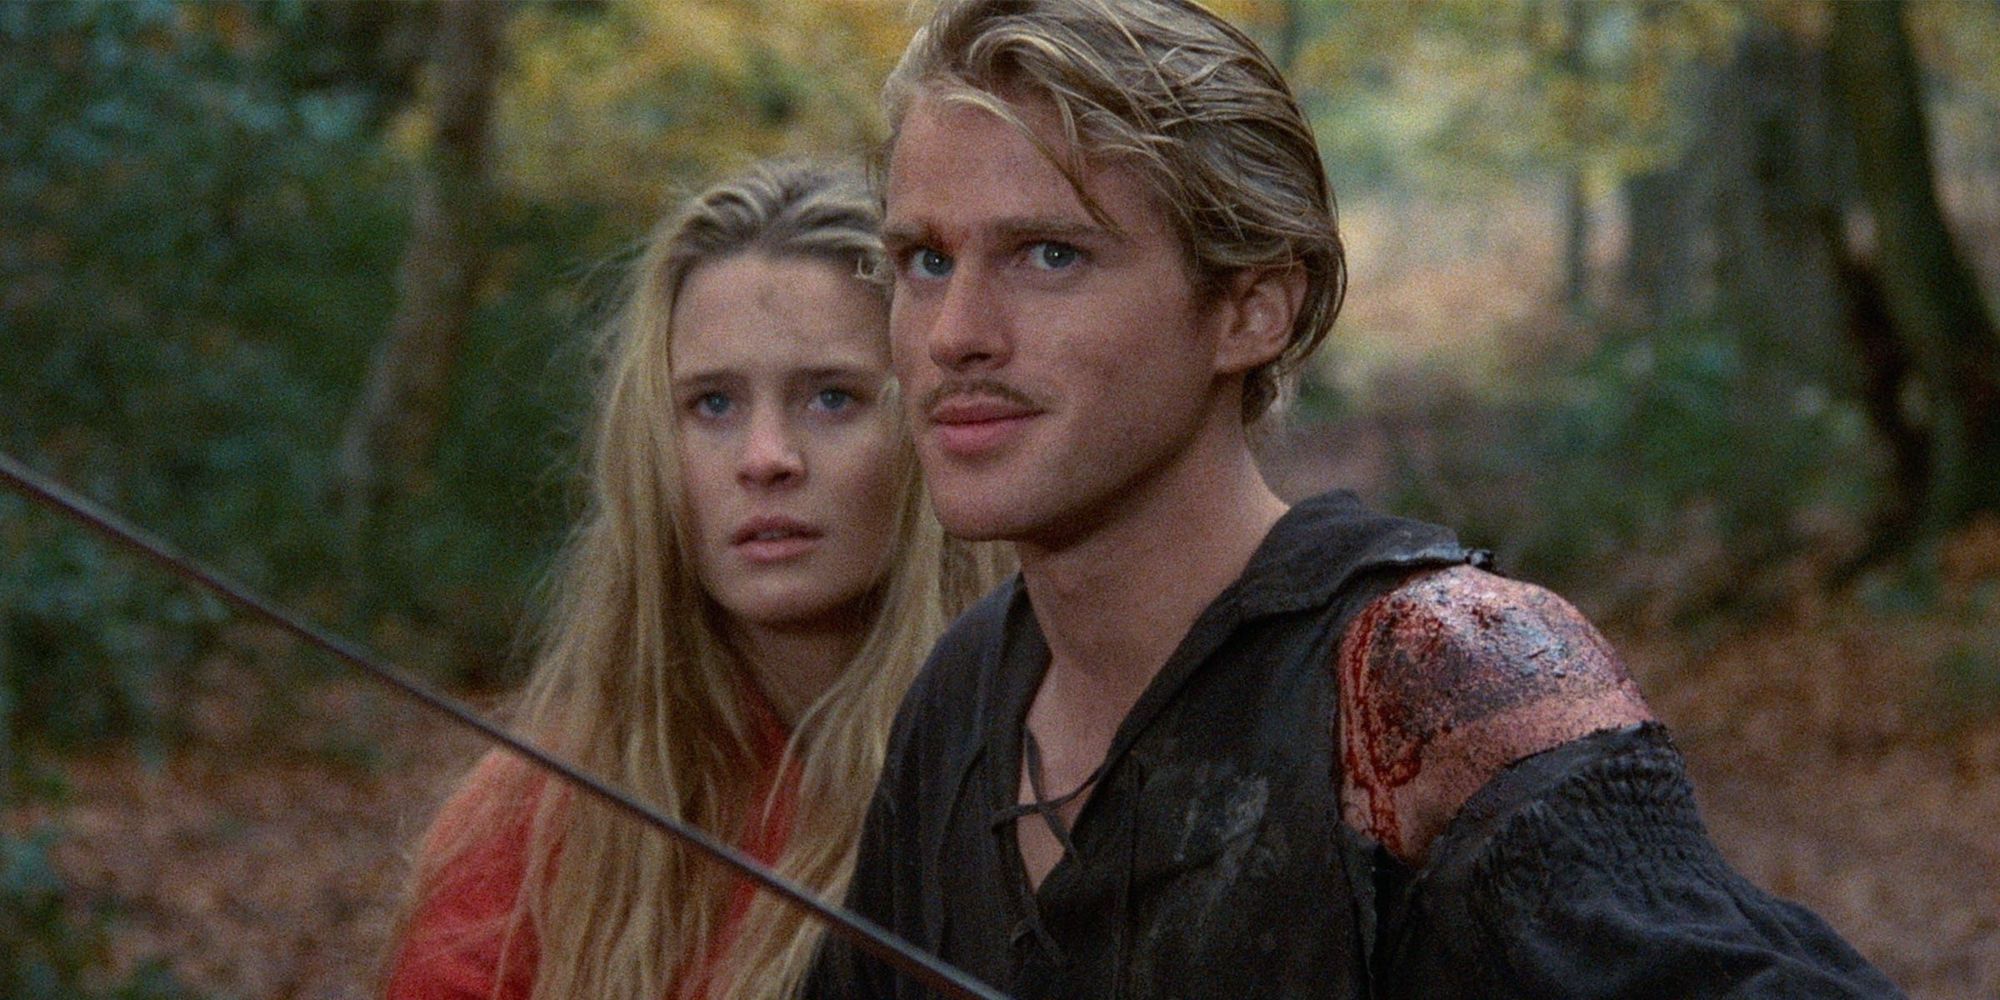 Westley protecting Buttercup in The Princess Bride